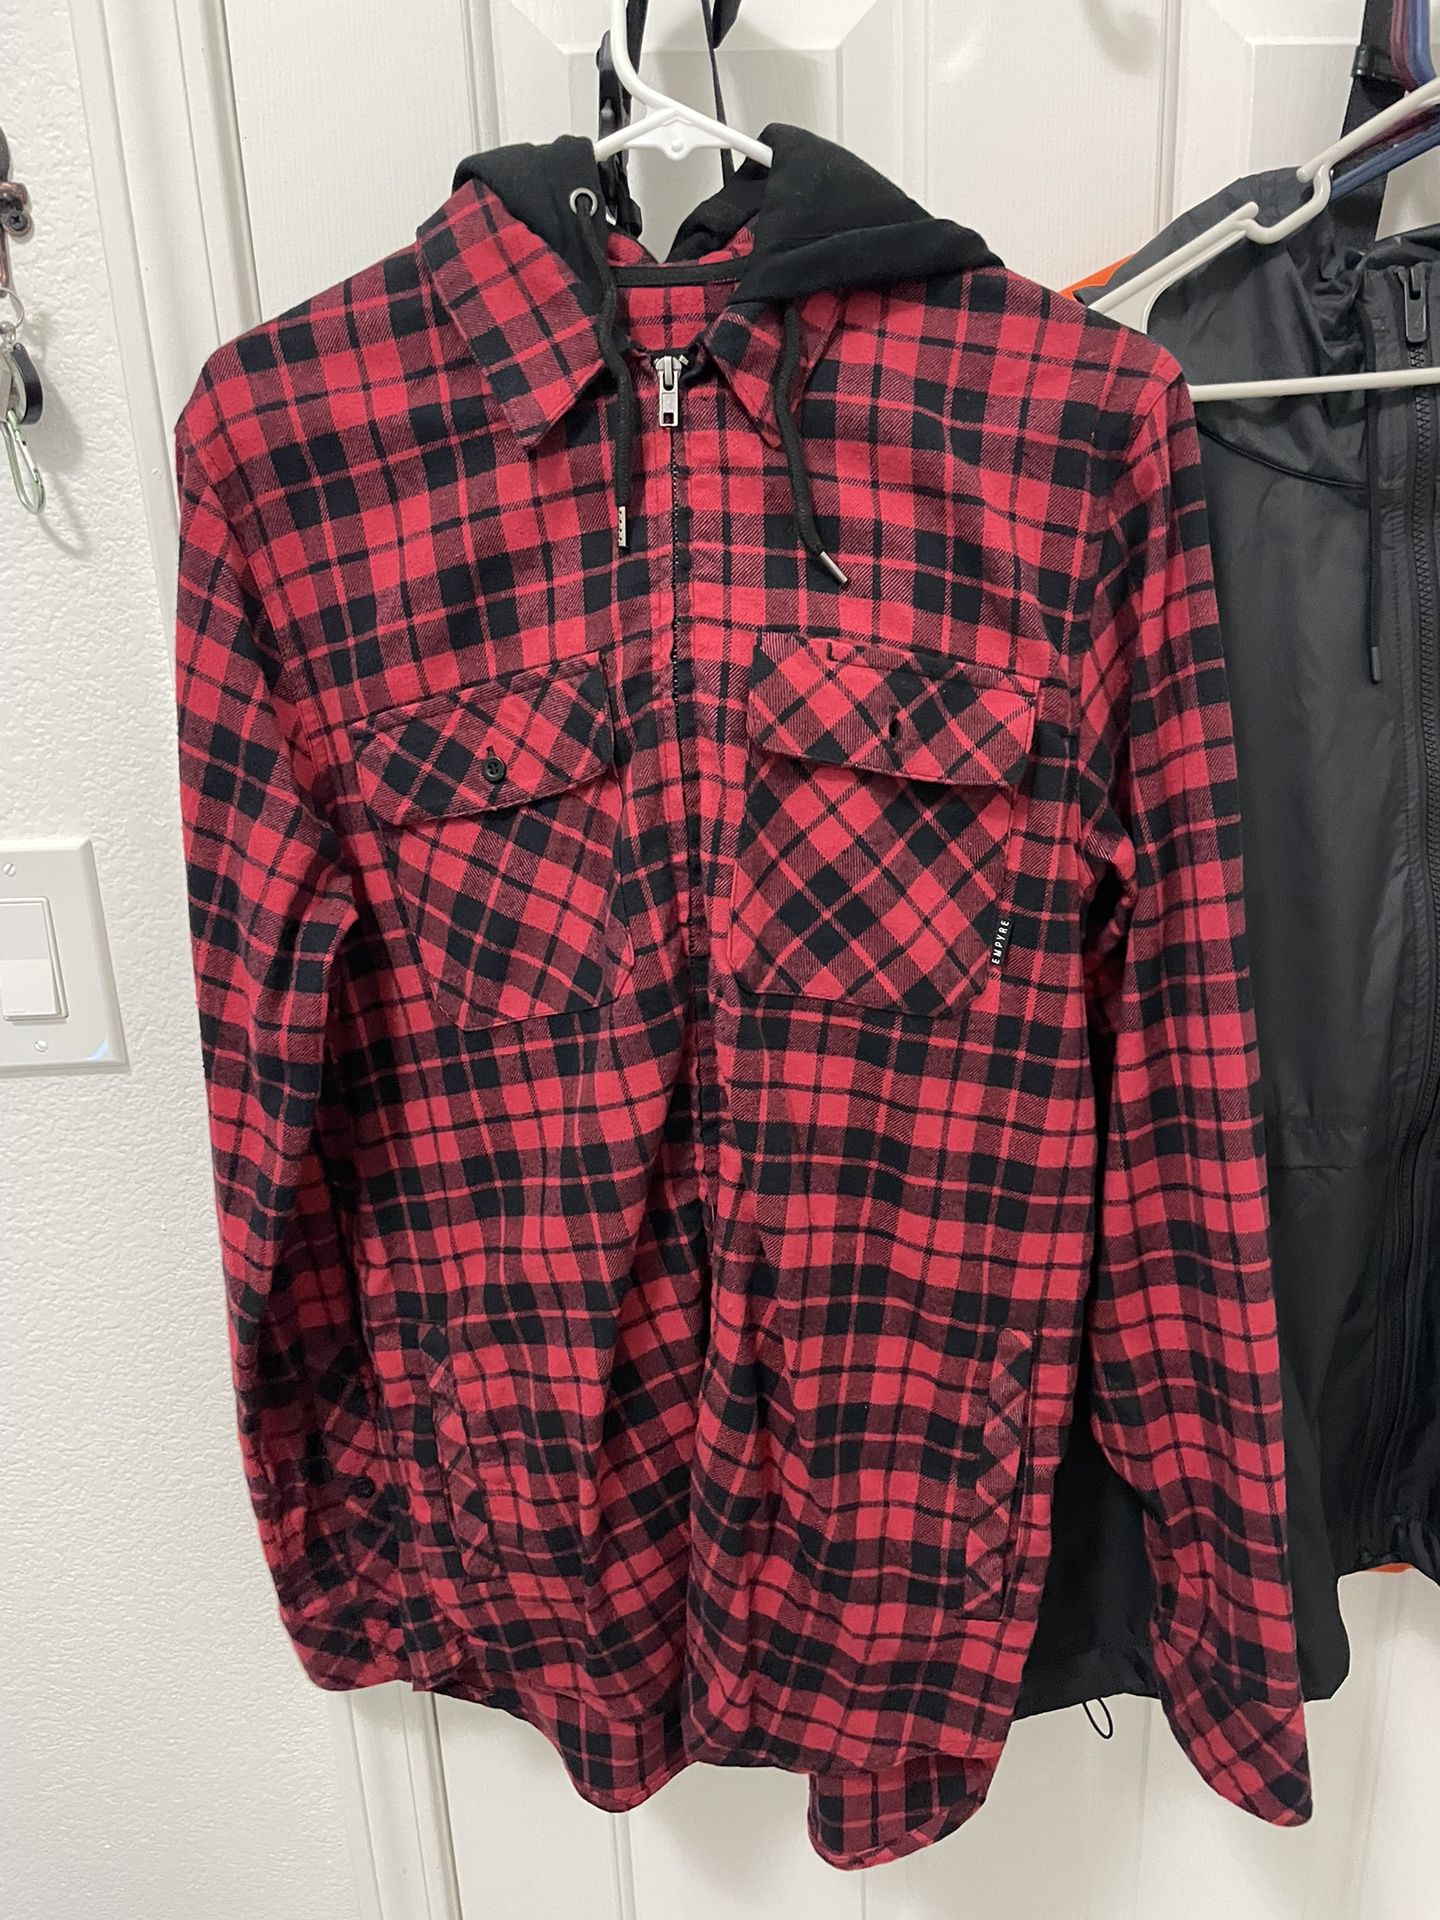 Empyre flannel zip up size M for Sale in Sacramento, CA - OfferUp